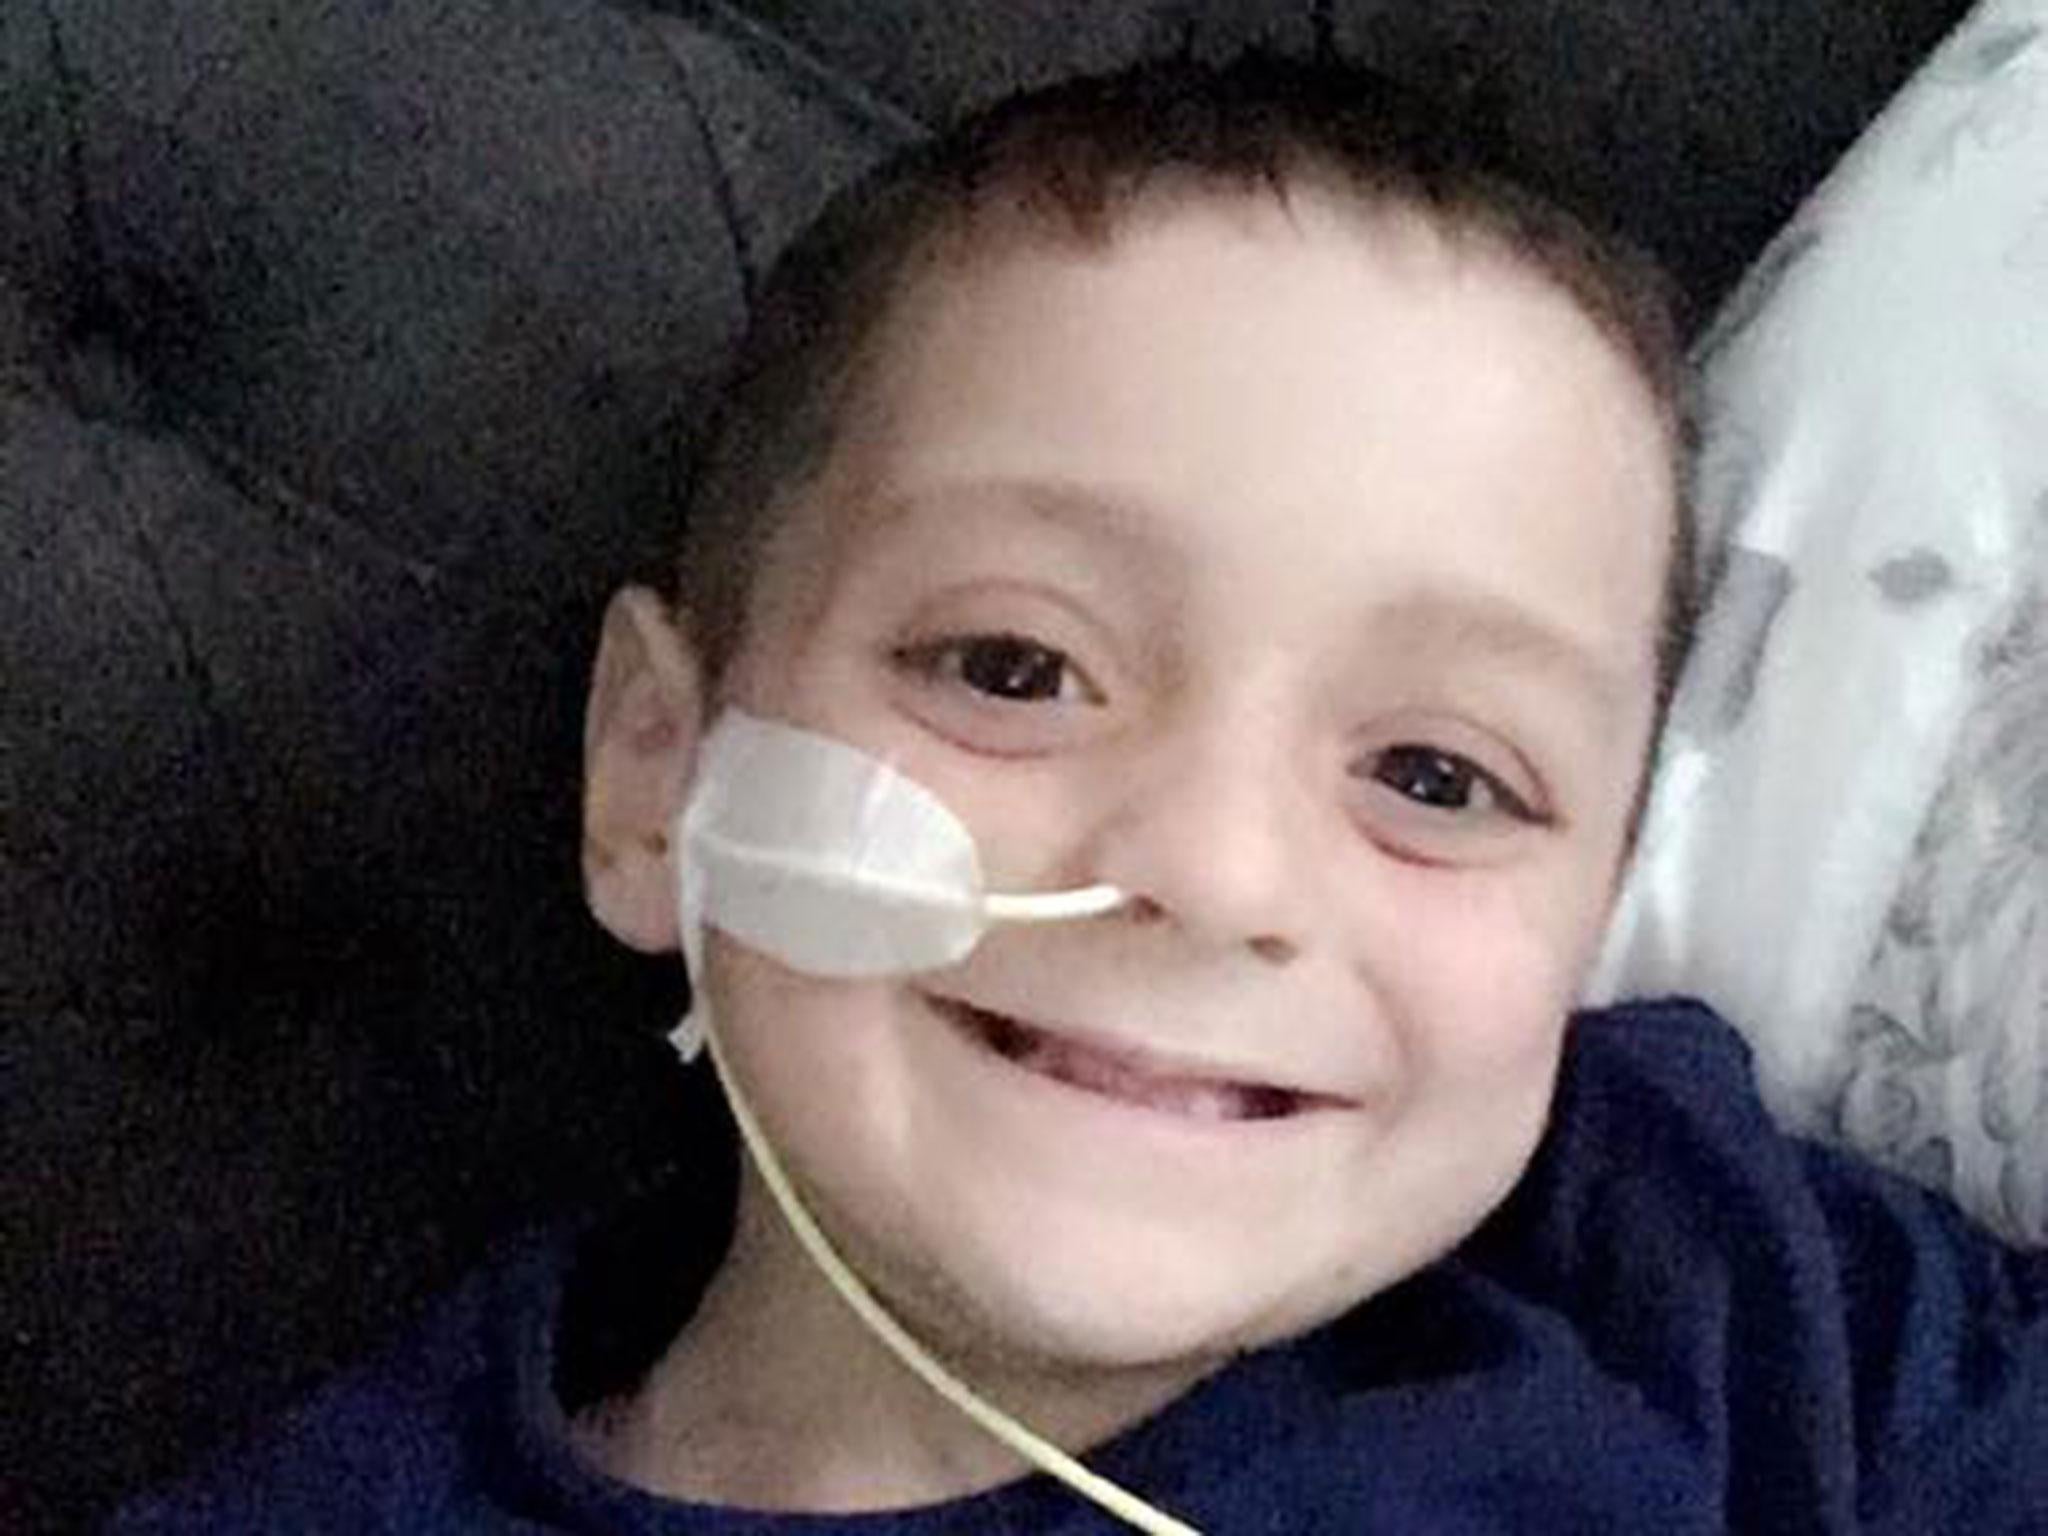 Bradley Lowery's family have confirmed he does not have long left to live